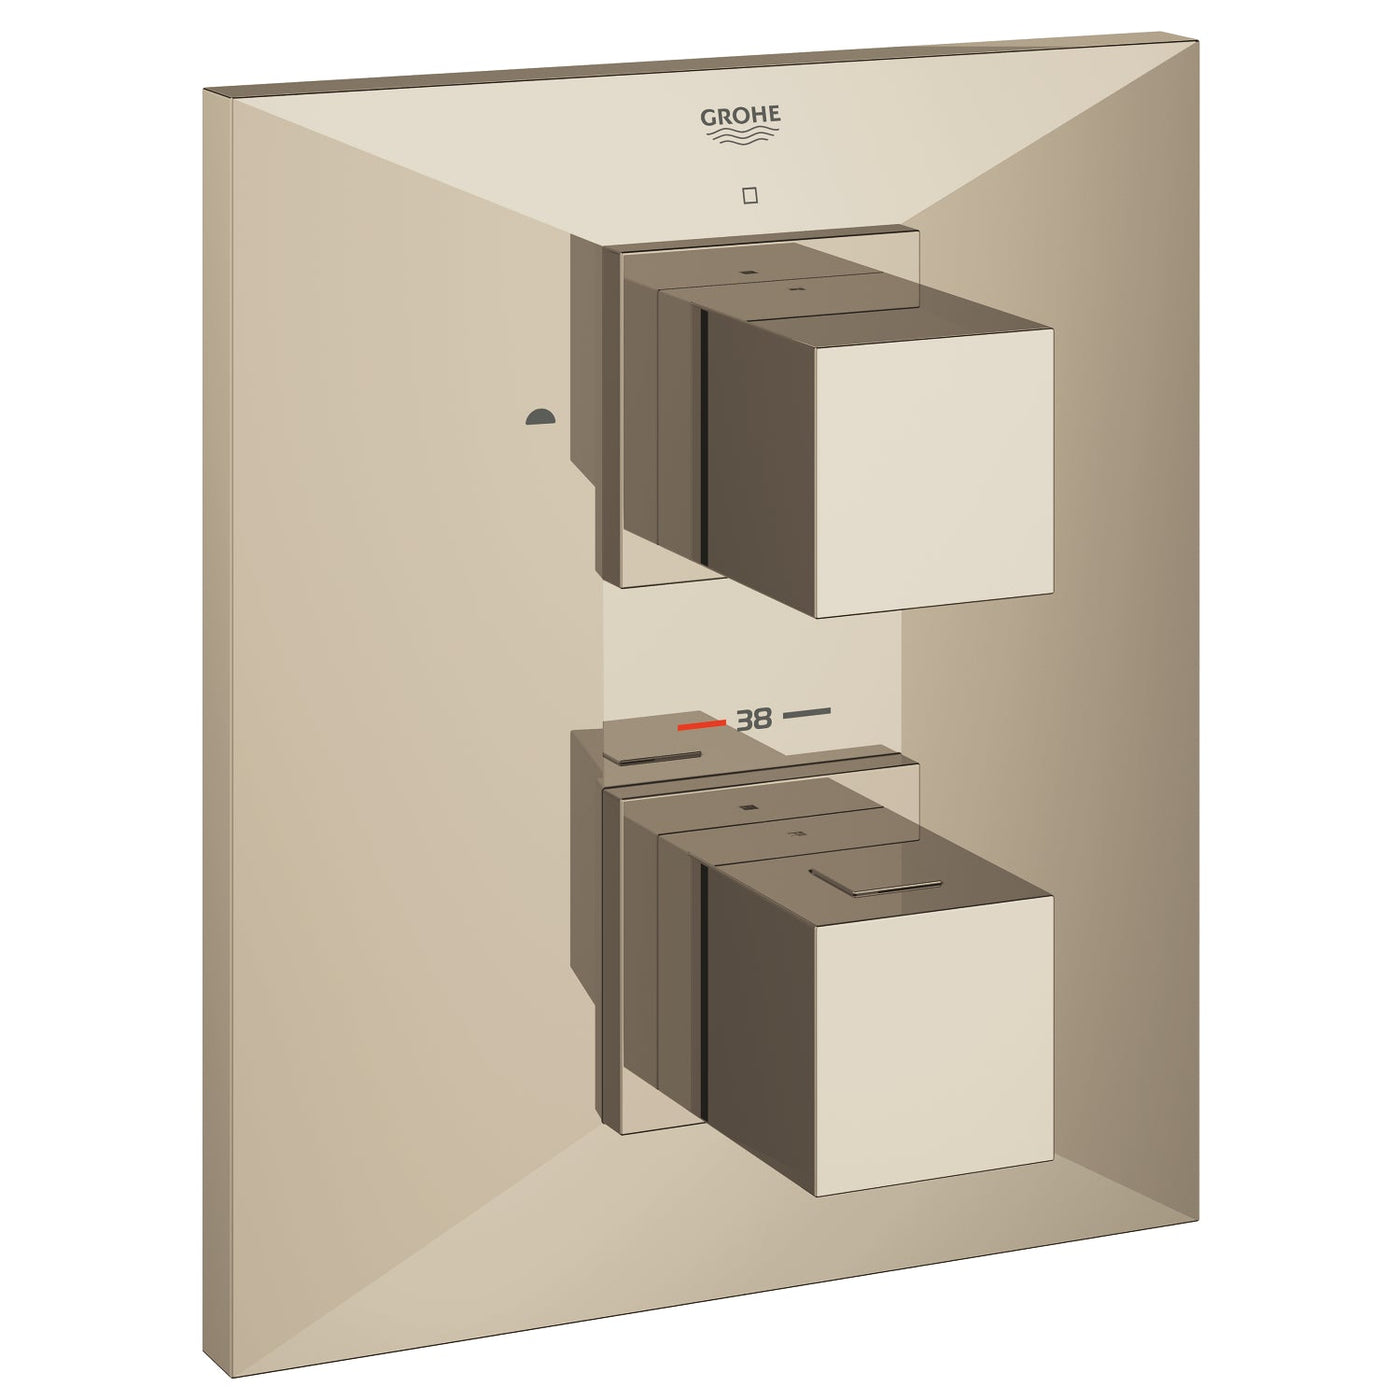 Grohe Polished Nickel Allure Brilliant Thermostat with integrated 2-way diverter
for bath or shower with more than one outlet - Letta London - Twin Valves With Diverter